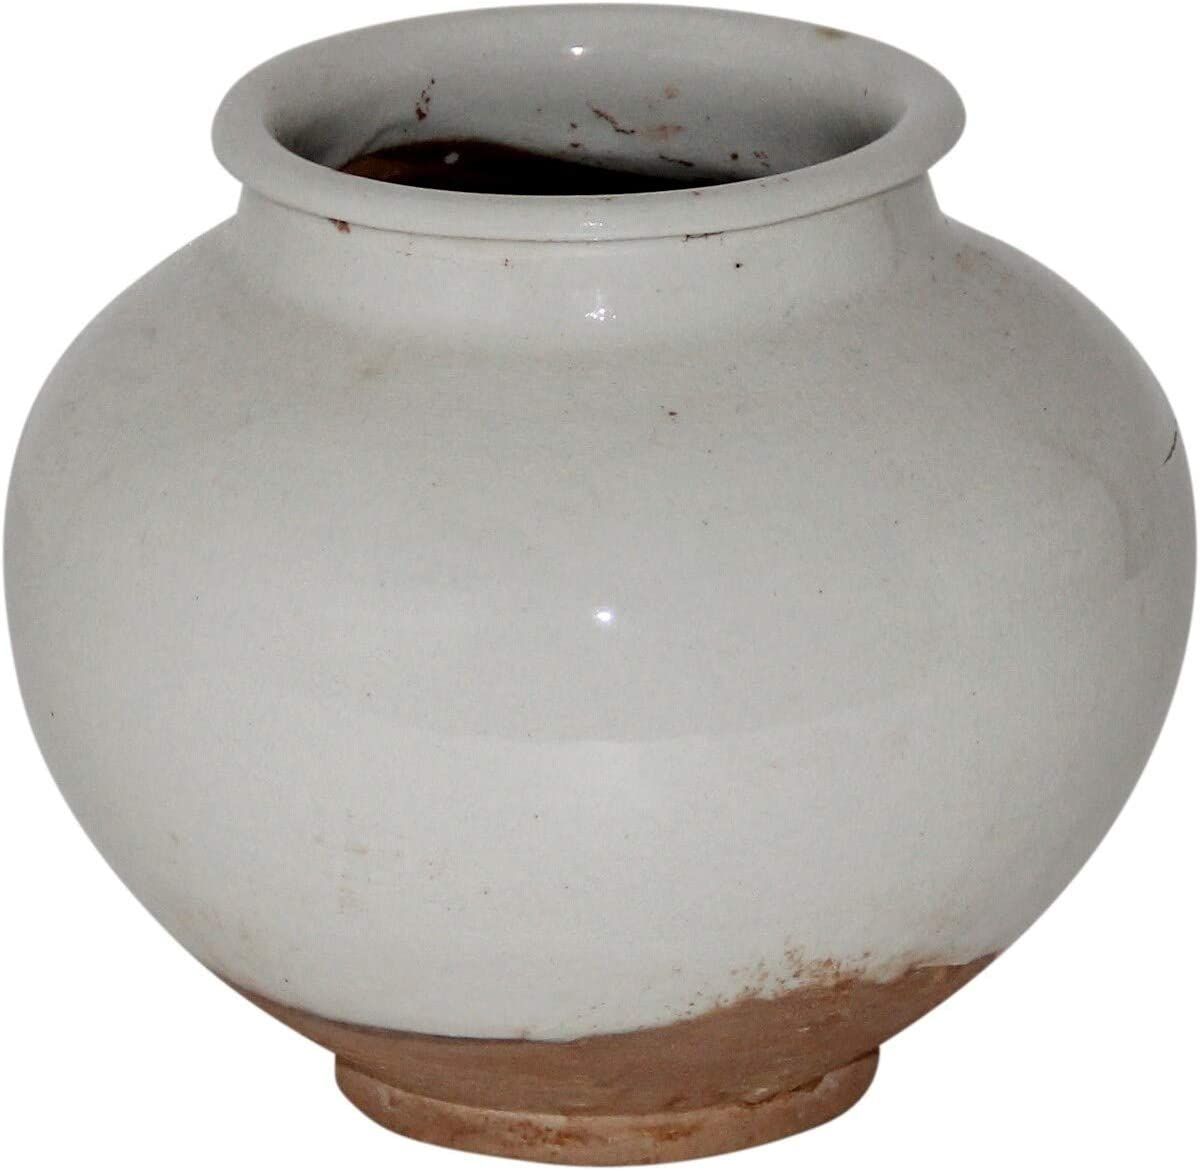 Ceramic Vintage Pot Small 6 Inch Tall Off White - N/a Handmade | Amazon (US)